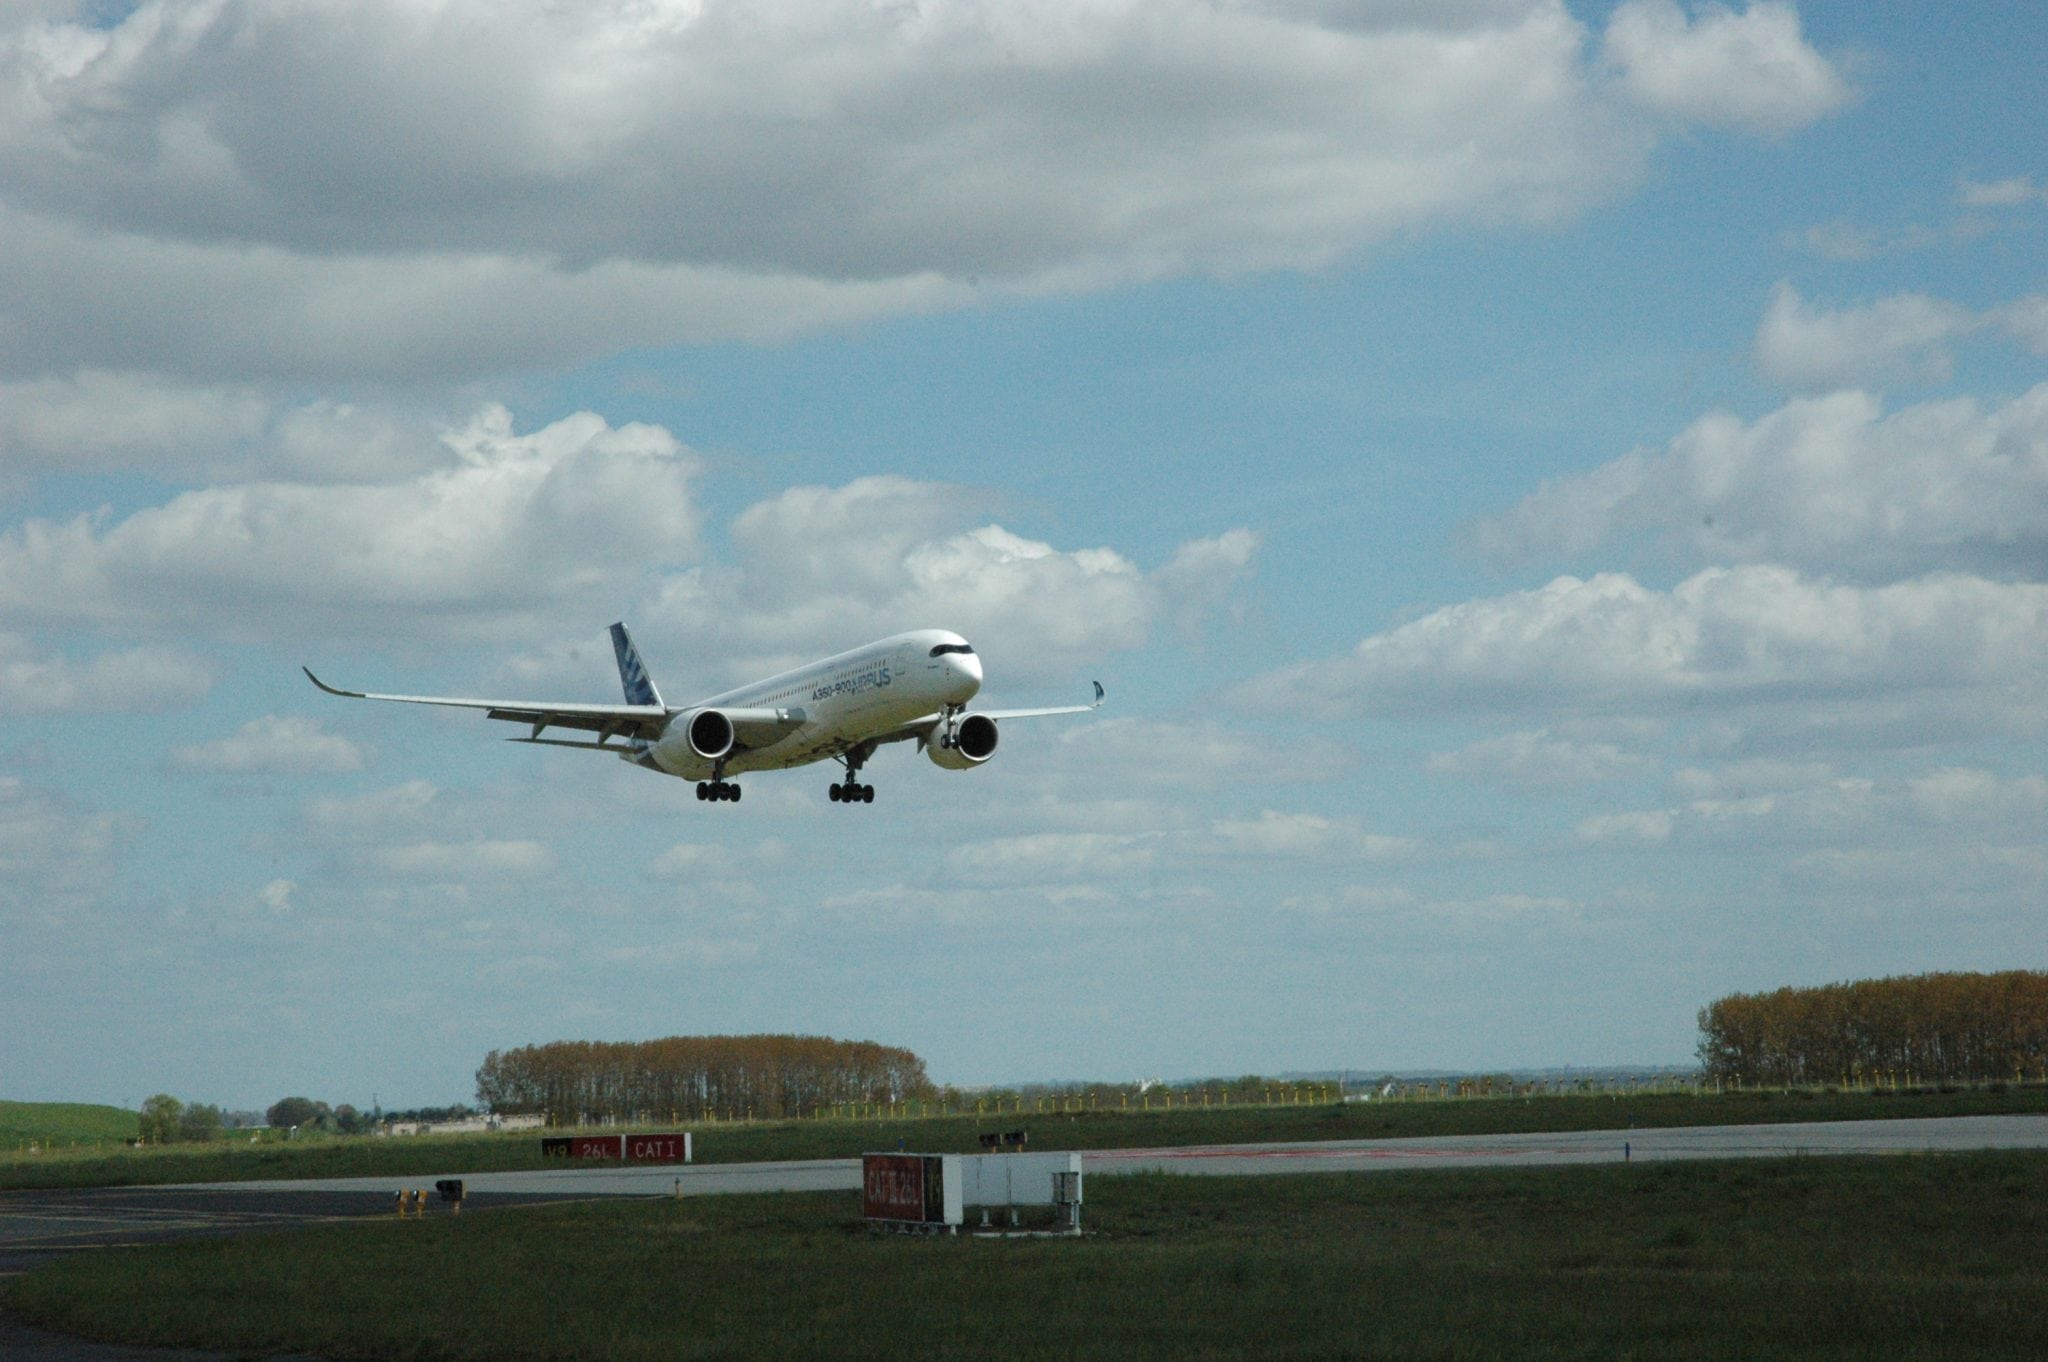 Airbus A350 completes LPV 200 Approach at CDG